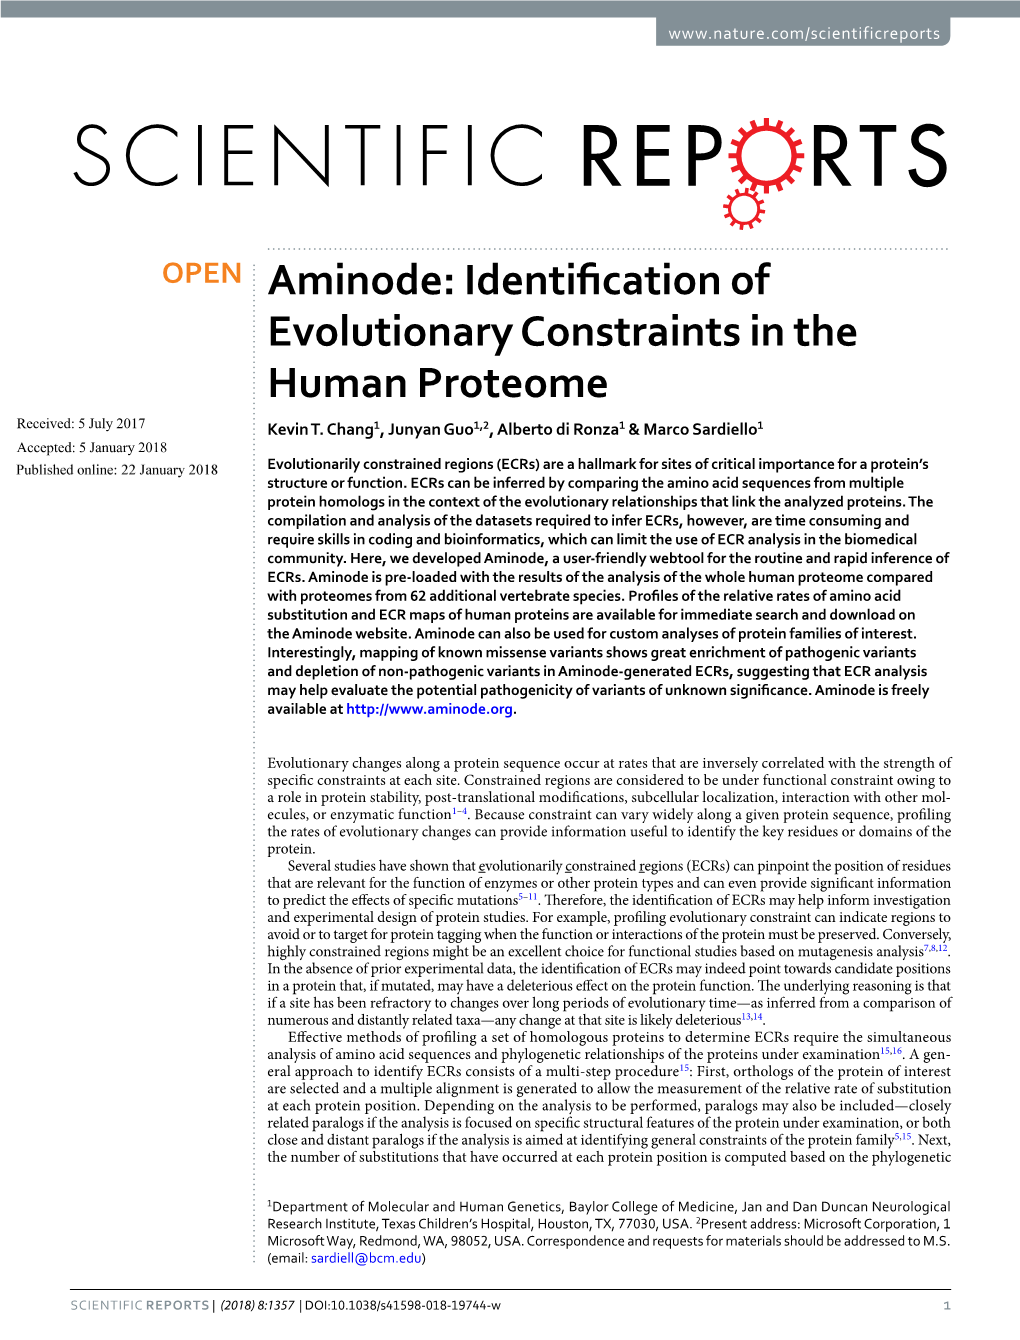 Aminode: Identification of Evolutionary Constraints in the Human Proteome